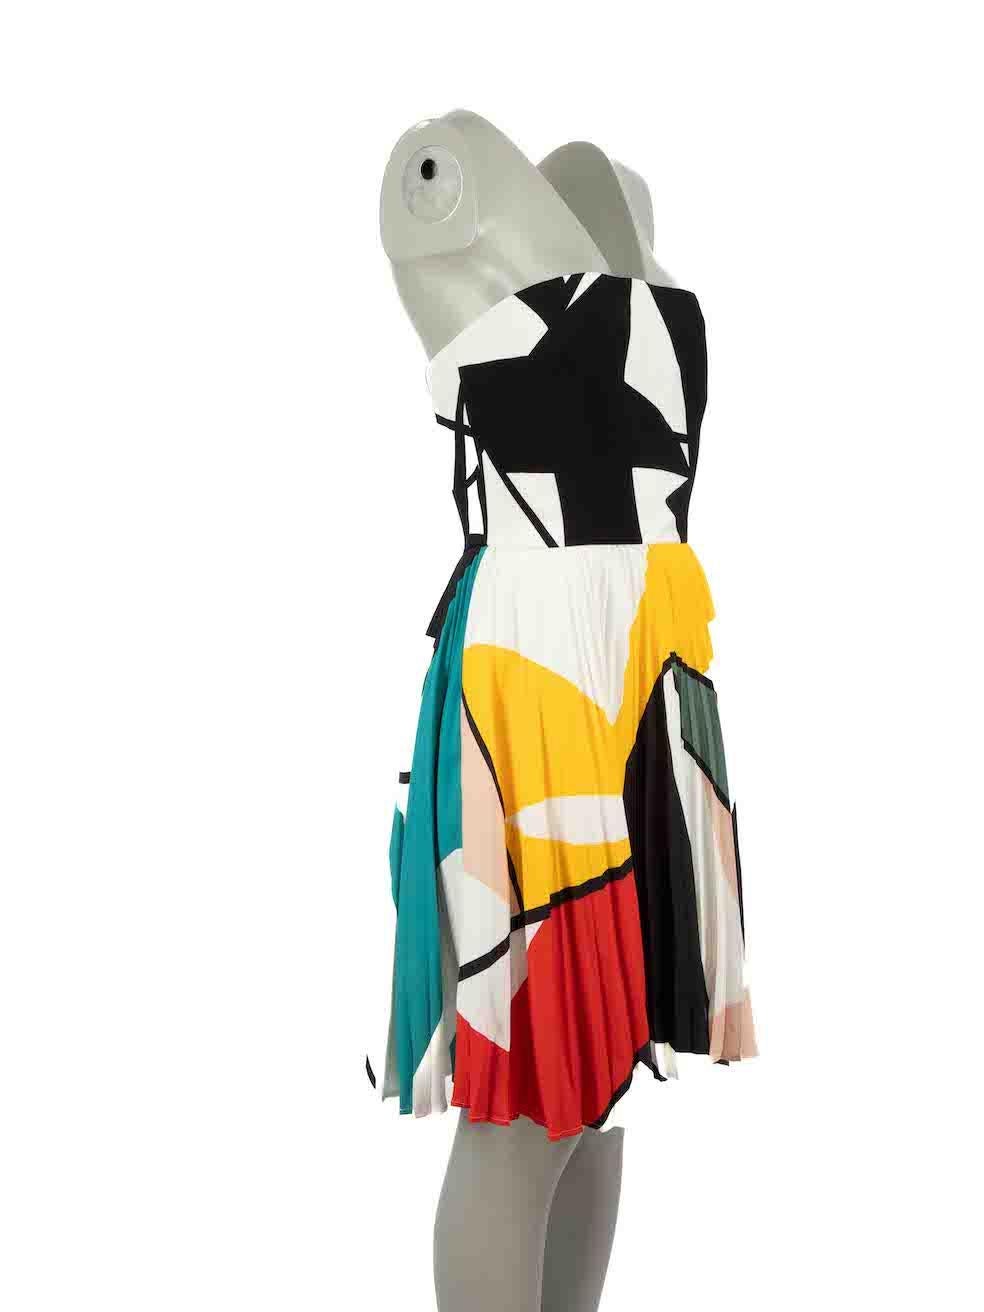 CONDITION is Very good. Minimal wear to dress is evident. Minimal wear to front neckline with small mark on this used Elie Saab designer resale item.
 
Details
Multicolour
Synthetic
Dress
Abstract pattern
Strapless
Mini
Pleated skirt
Side zip and